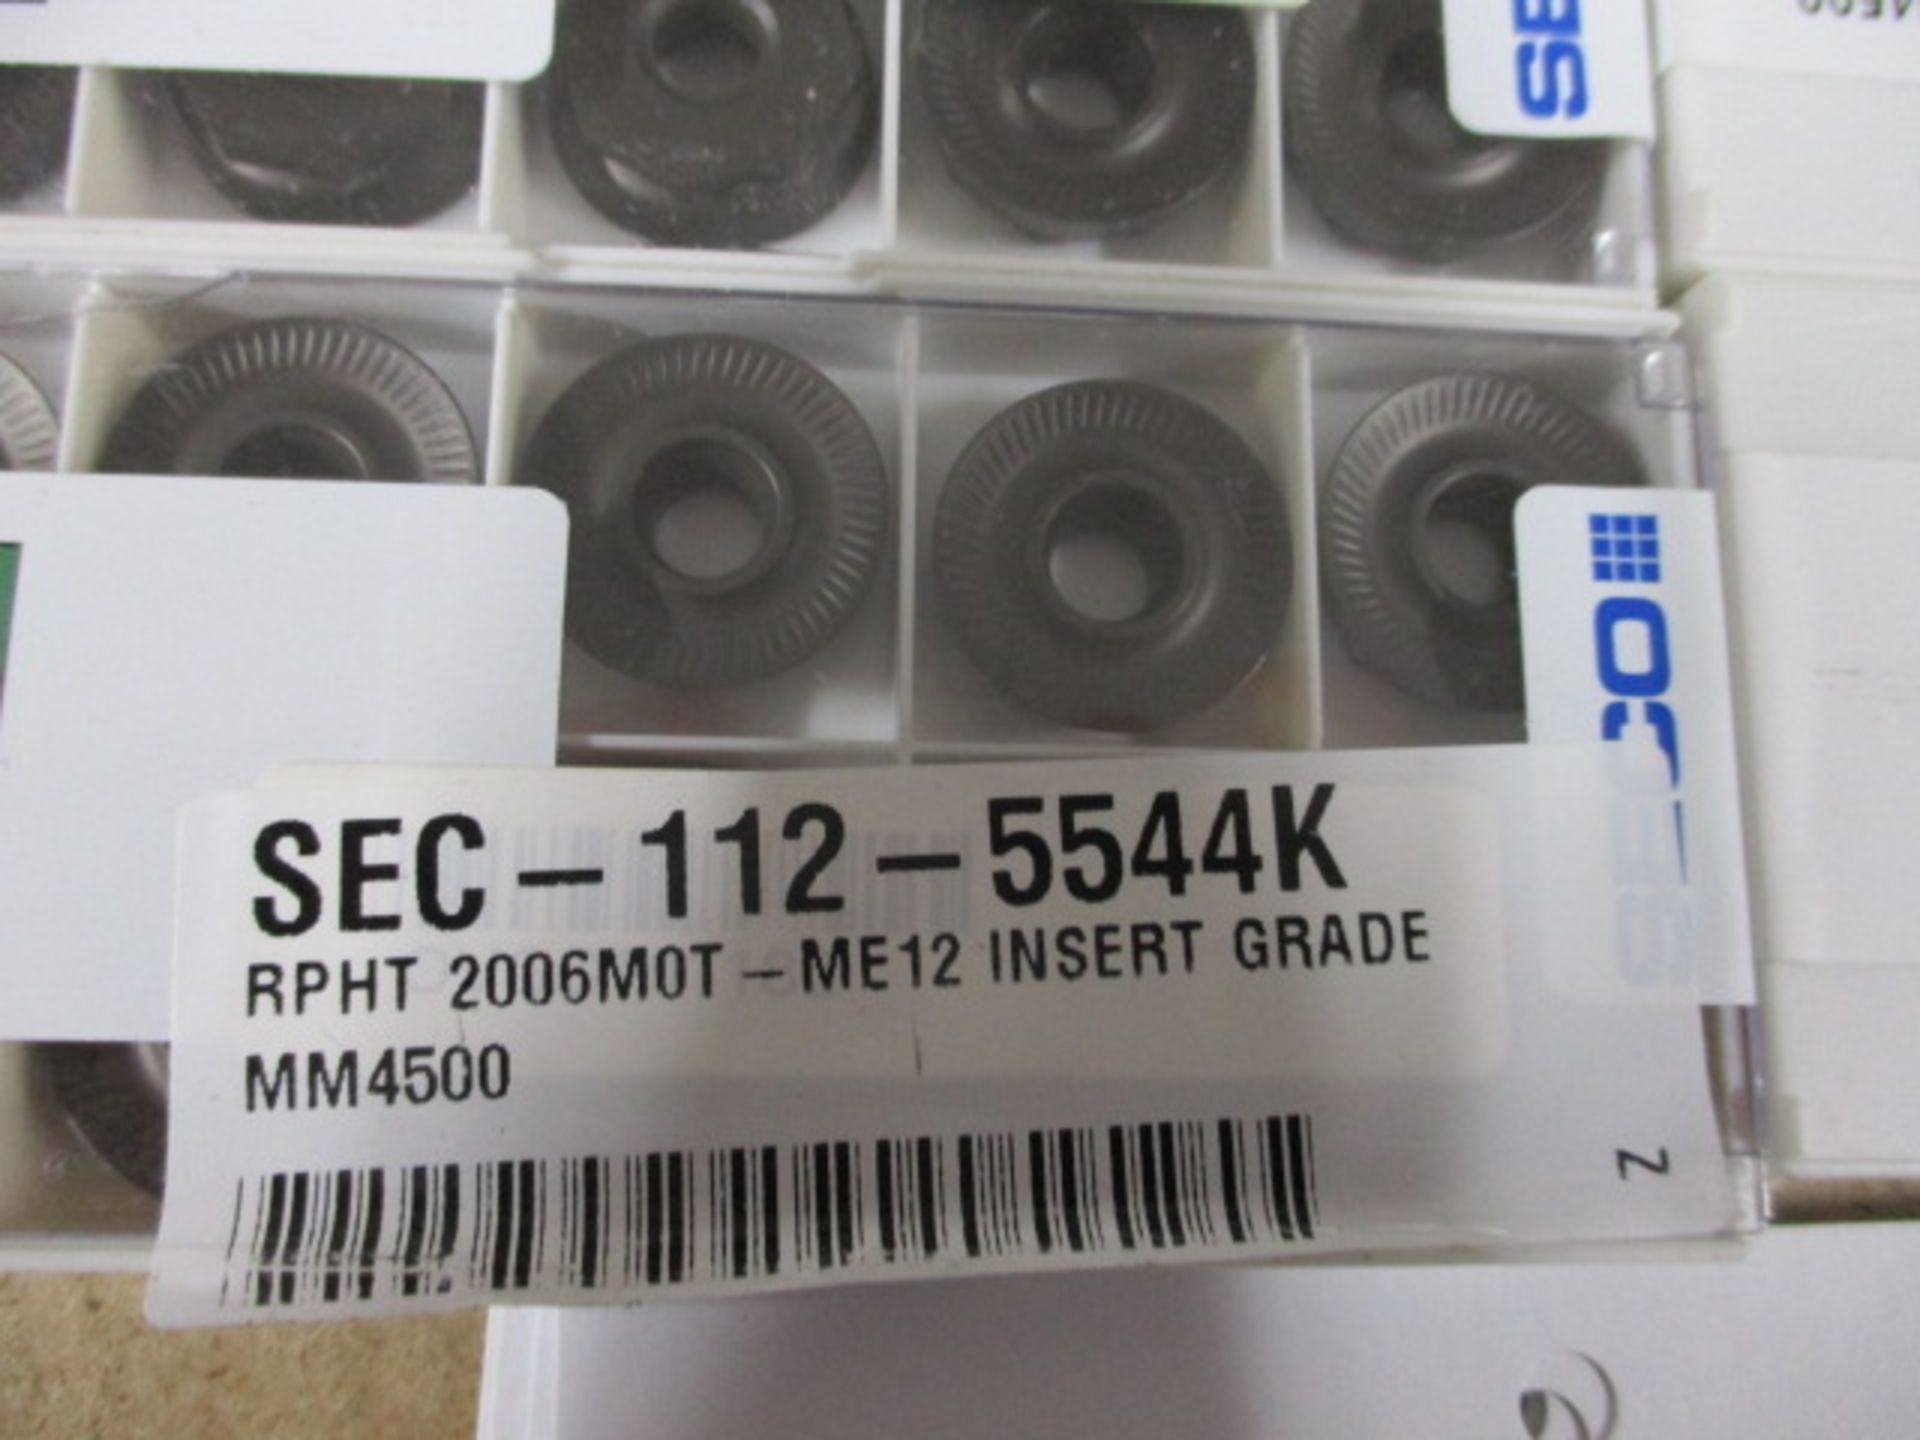 Indexable carbide inserts - Image 2 of 2